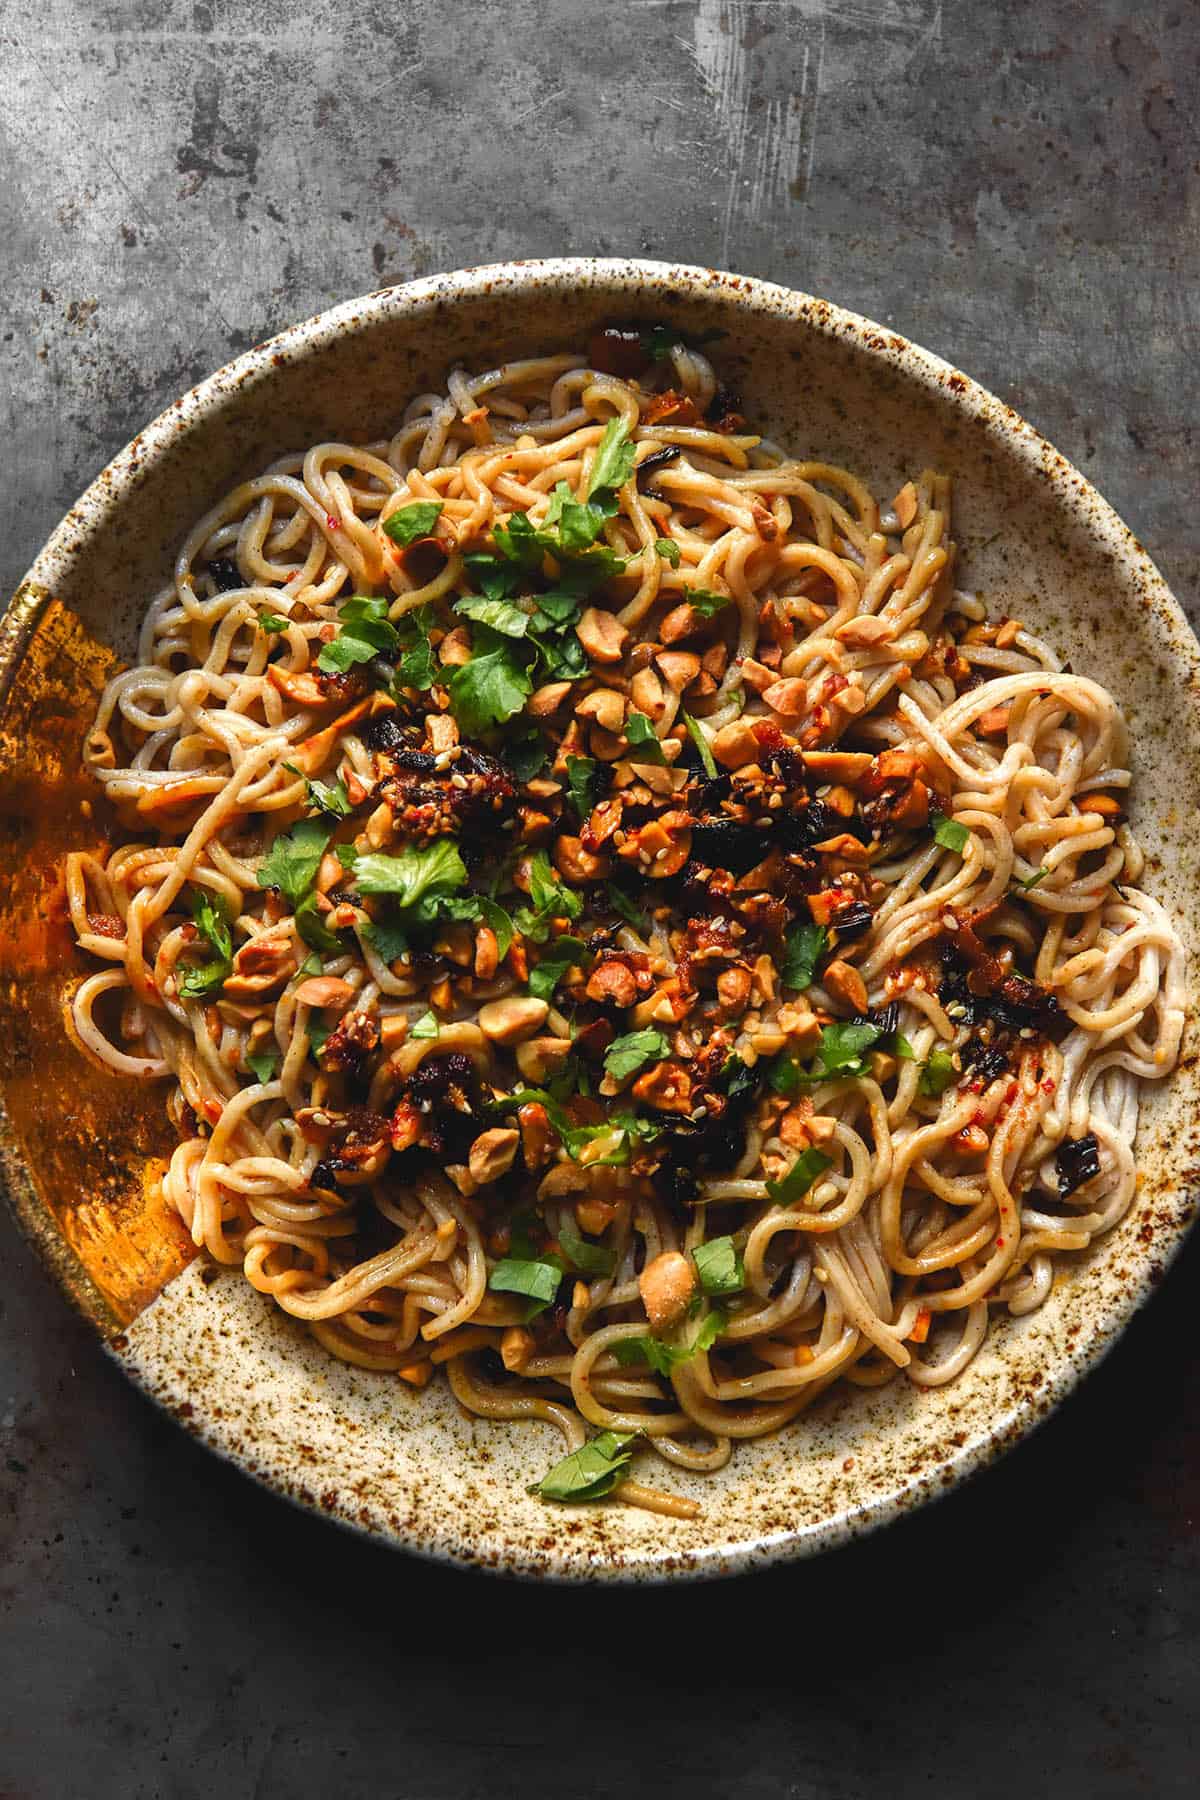 An aerial image of gluten free egg noodles in a beige speckled ceramic bowl. The egg noodles are topped with chilli crisp. peanuts and chopped coriander and the bowl sits atop a dark steel backdrop